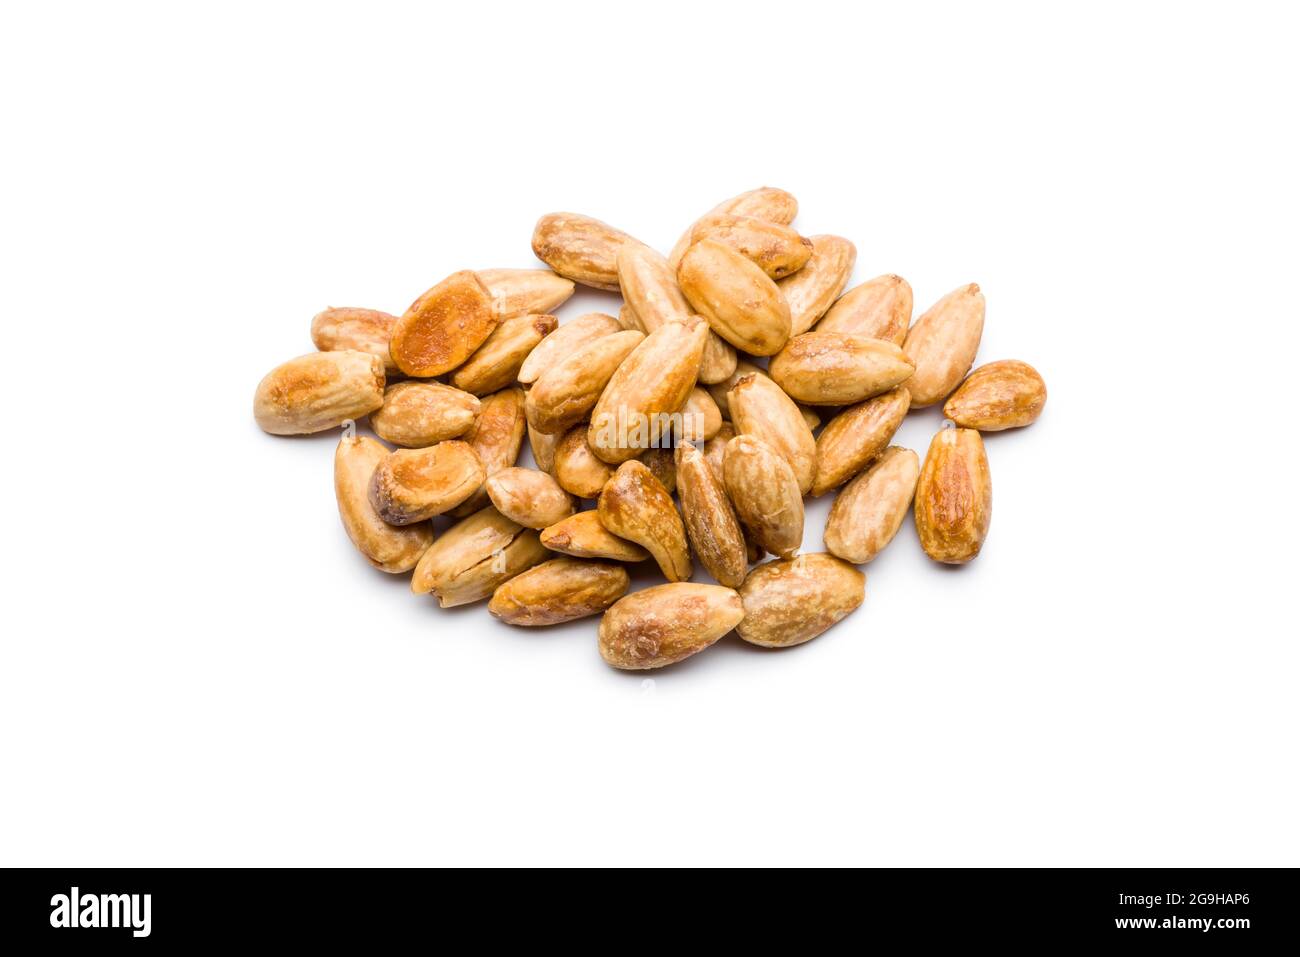 Blanched almonds bunch on white background Stock Photo